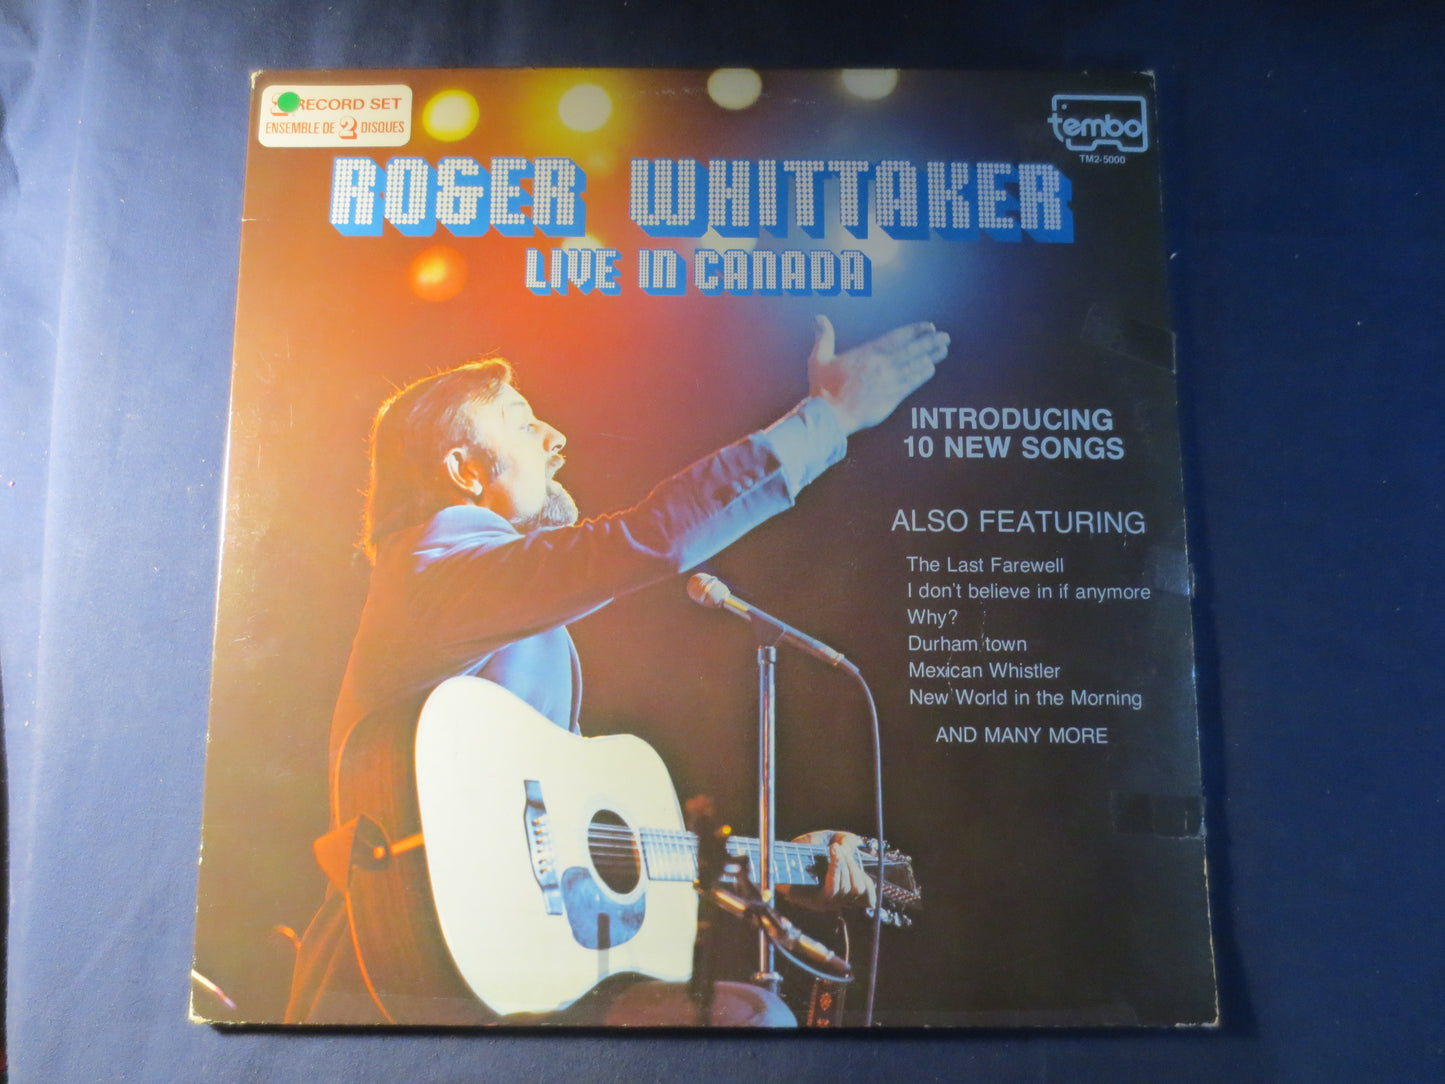 ROGER WHITTAKER, LIVE in Canada, Country Records, Vintage Vinyl, Record Vinyl, Records, Vinyl Records, Vinyl, 1975 Records